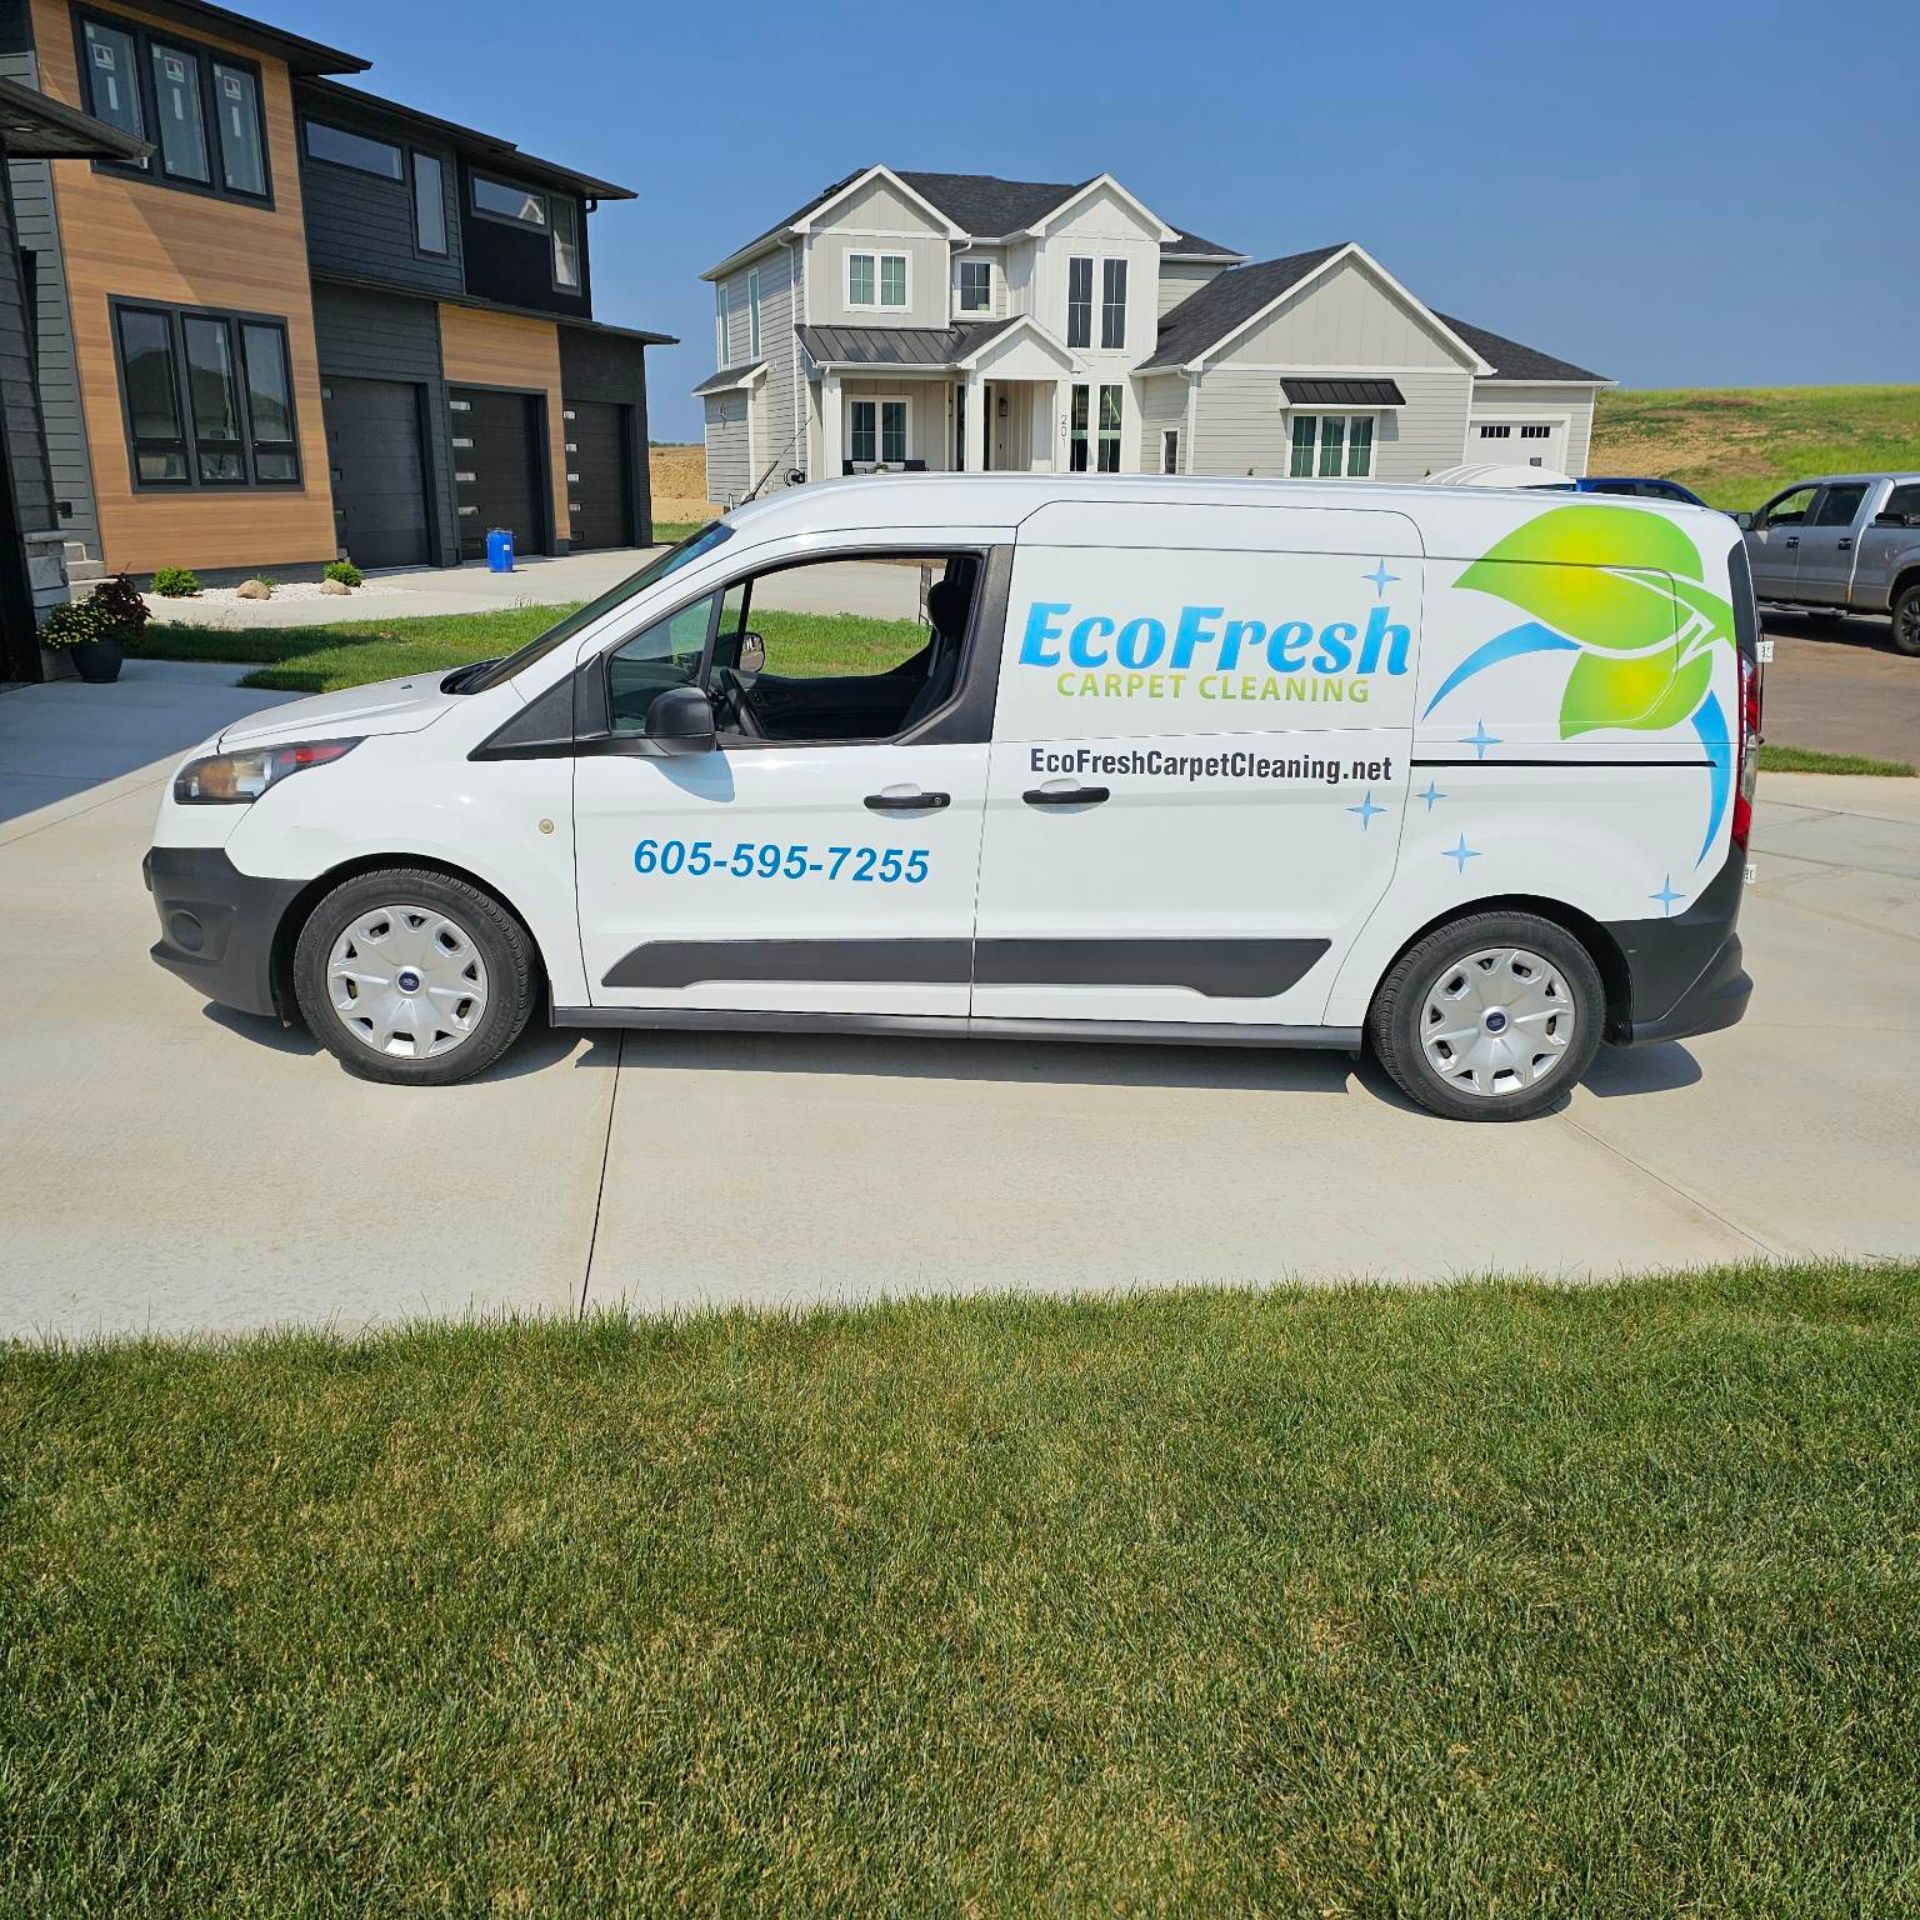 Carpet Cleaning In Sioux Falls Sd